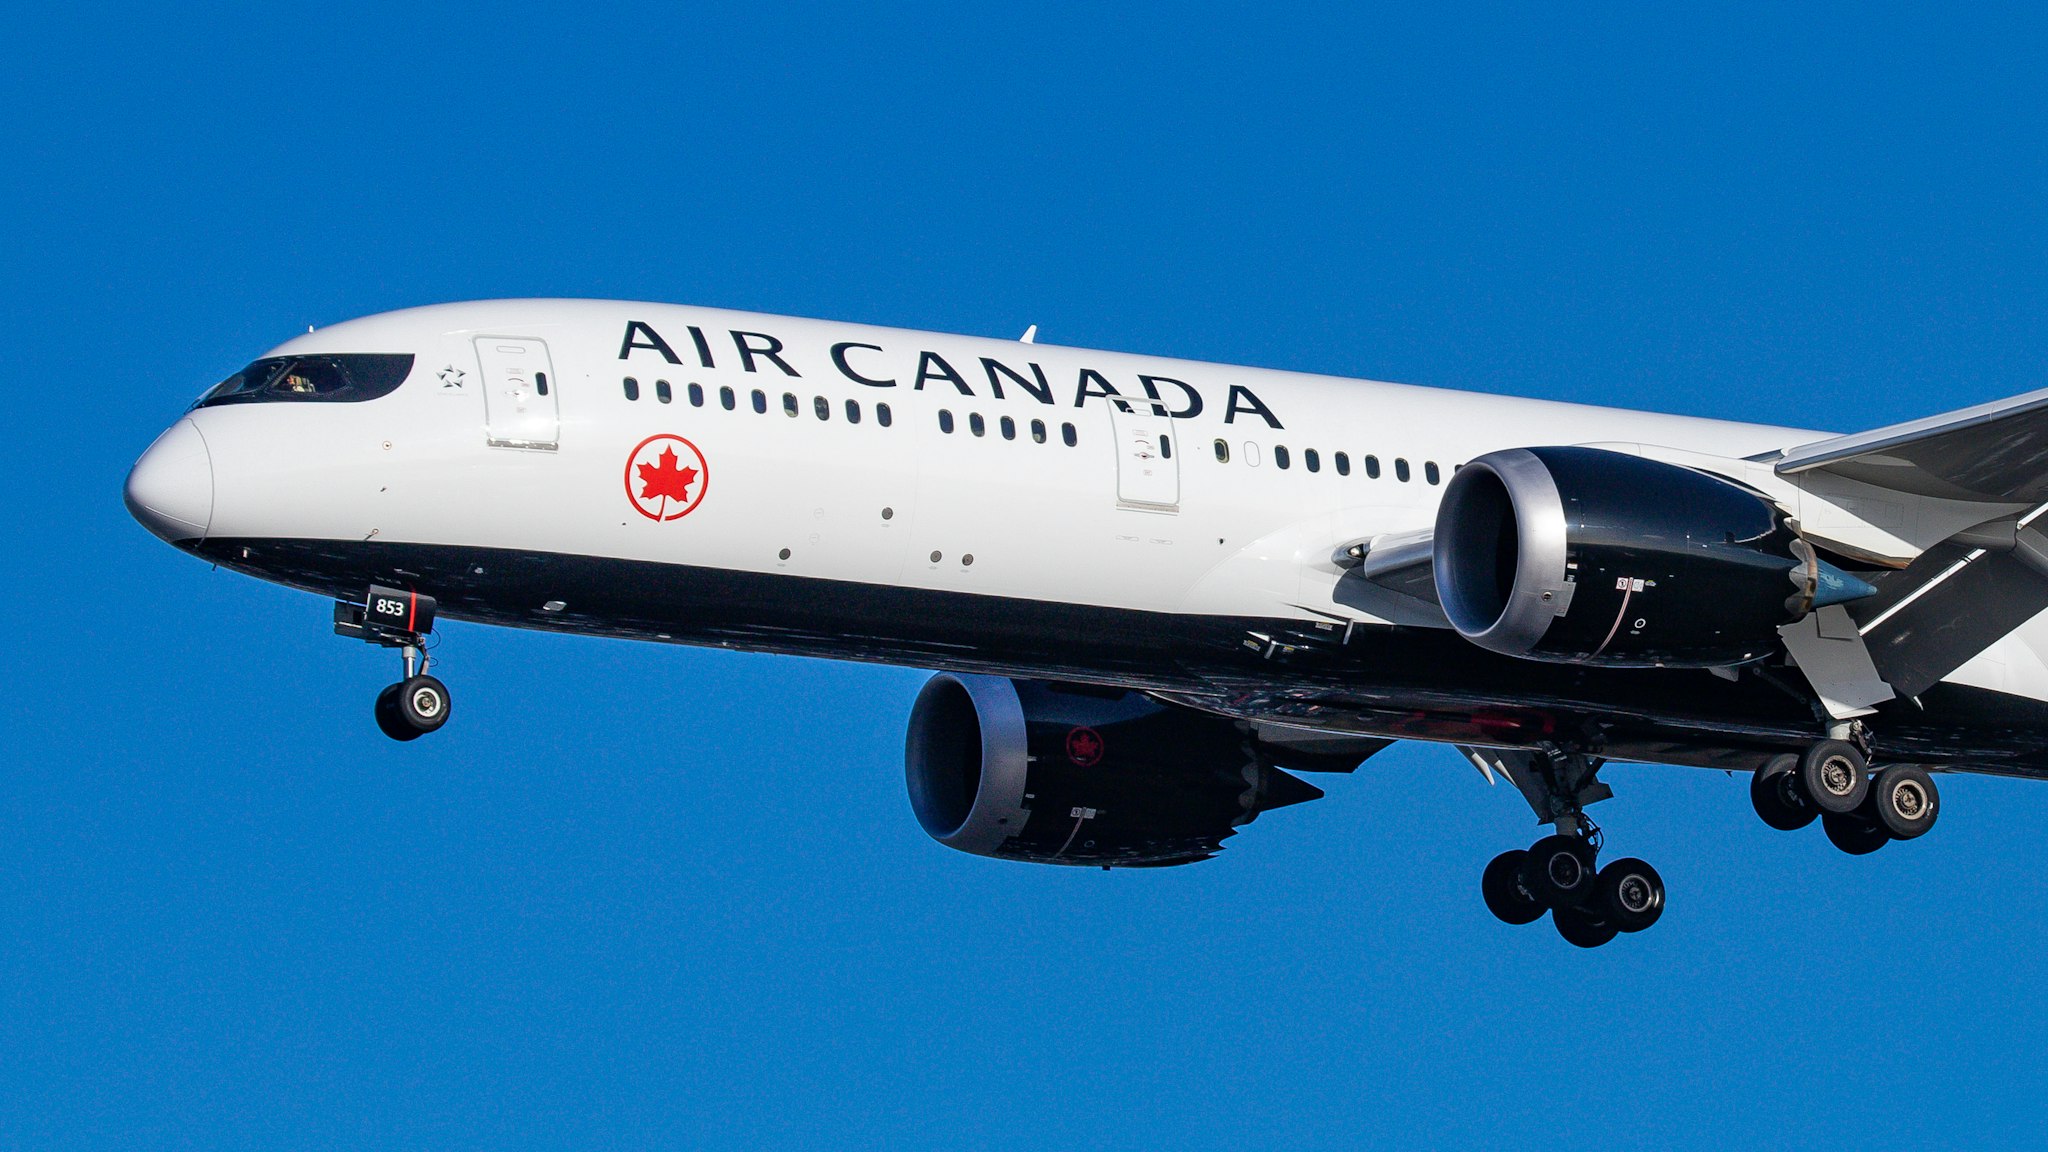 Air Canada Boeing 787-9 Dreamliner aircraft landing at London Heathrow International Airport LHR EGLL during a blue sky summer day in England, UK, on 2 August 2019. The airplane that is on final approach before the runway has 2x GEnx-1B jet engines and has the registration C-FVLQ. Air Canada AC ACA is the flag carrier and largest airline carrier of Canada and is a Star Alliance aviation alliance member. The airline connects the British capital to Calgary, Halifax, Montréal Trudeau, Ottawa, St. John's, Toronto Pearson and Vancouver airports. (Photo by Nicolas Economou/NurPhoto via Getty Images)